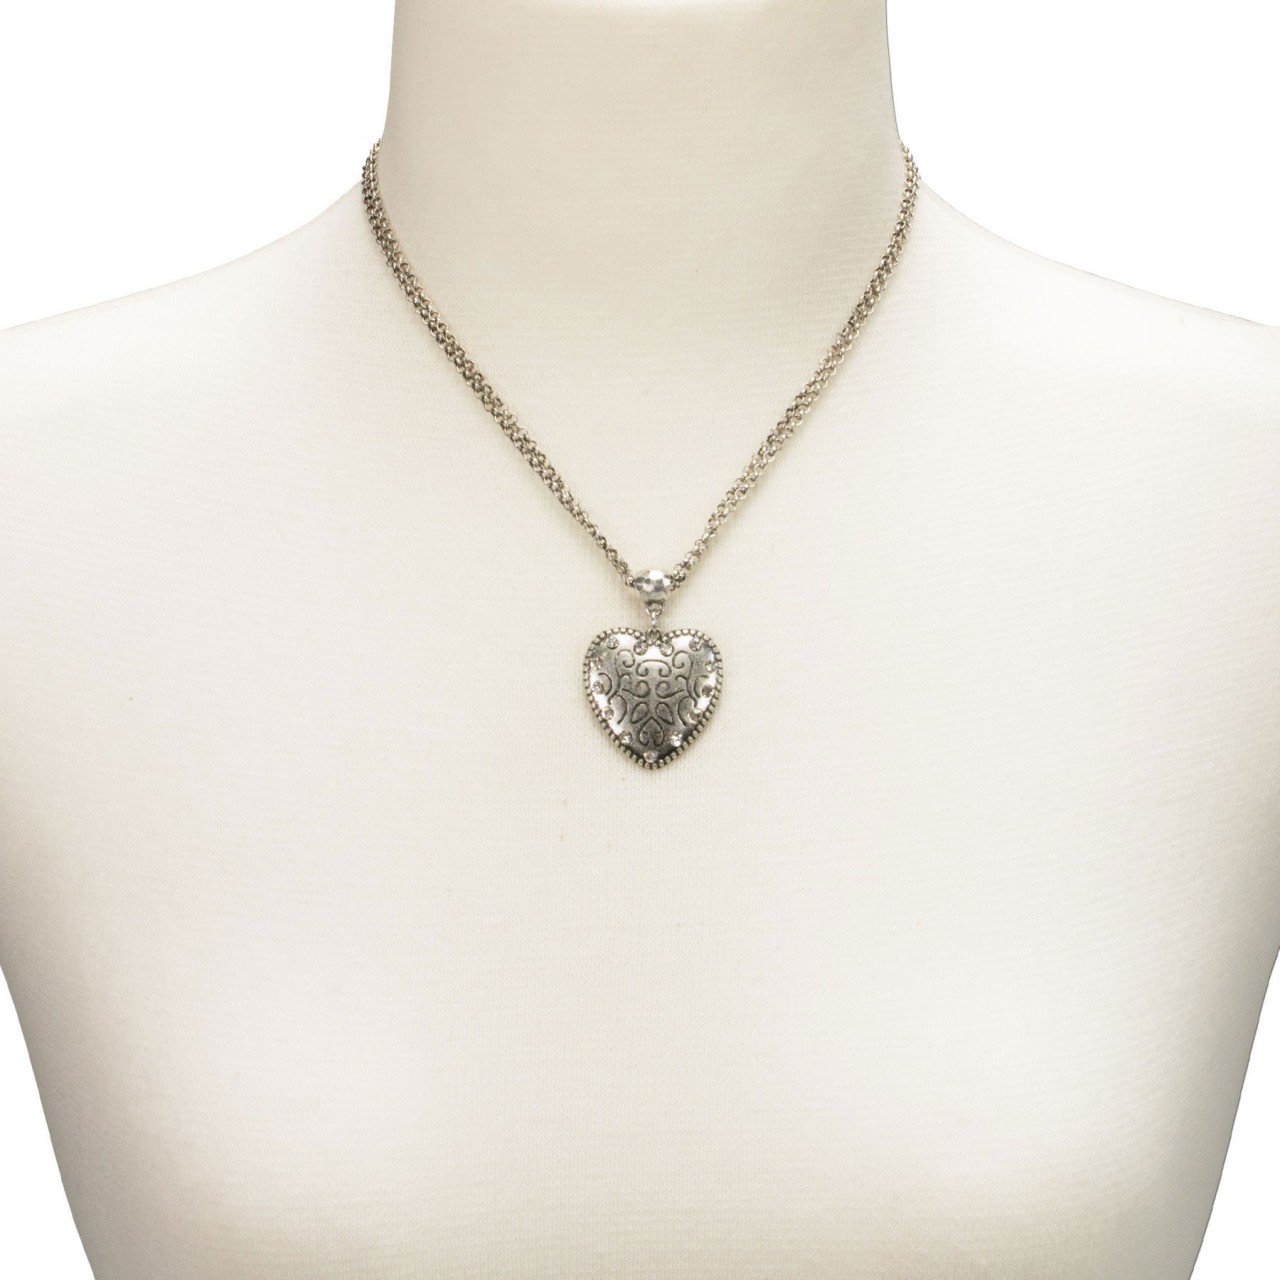 Necklace with Heart Pendant, Antique Silver